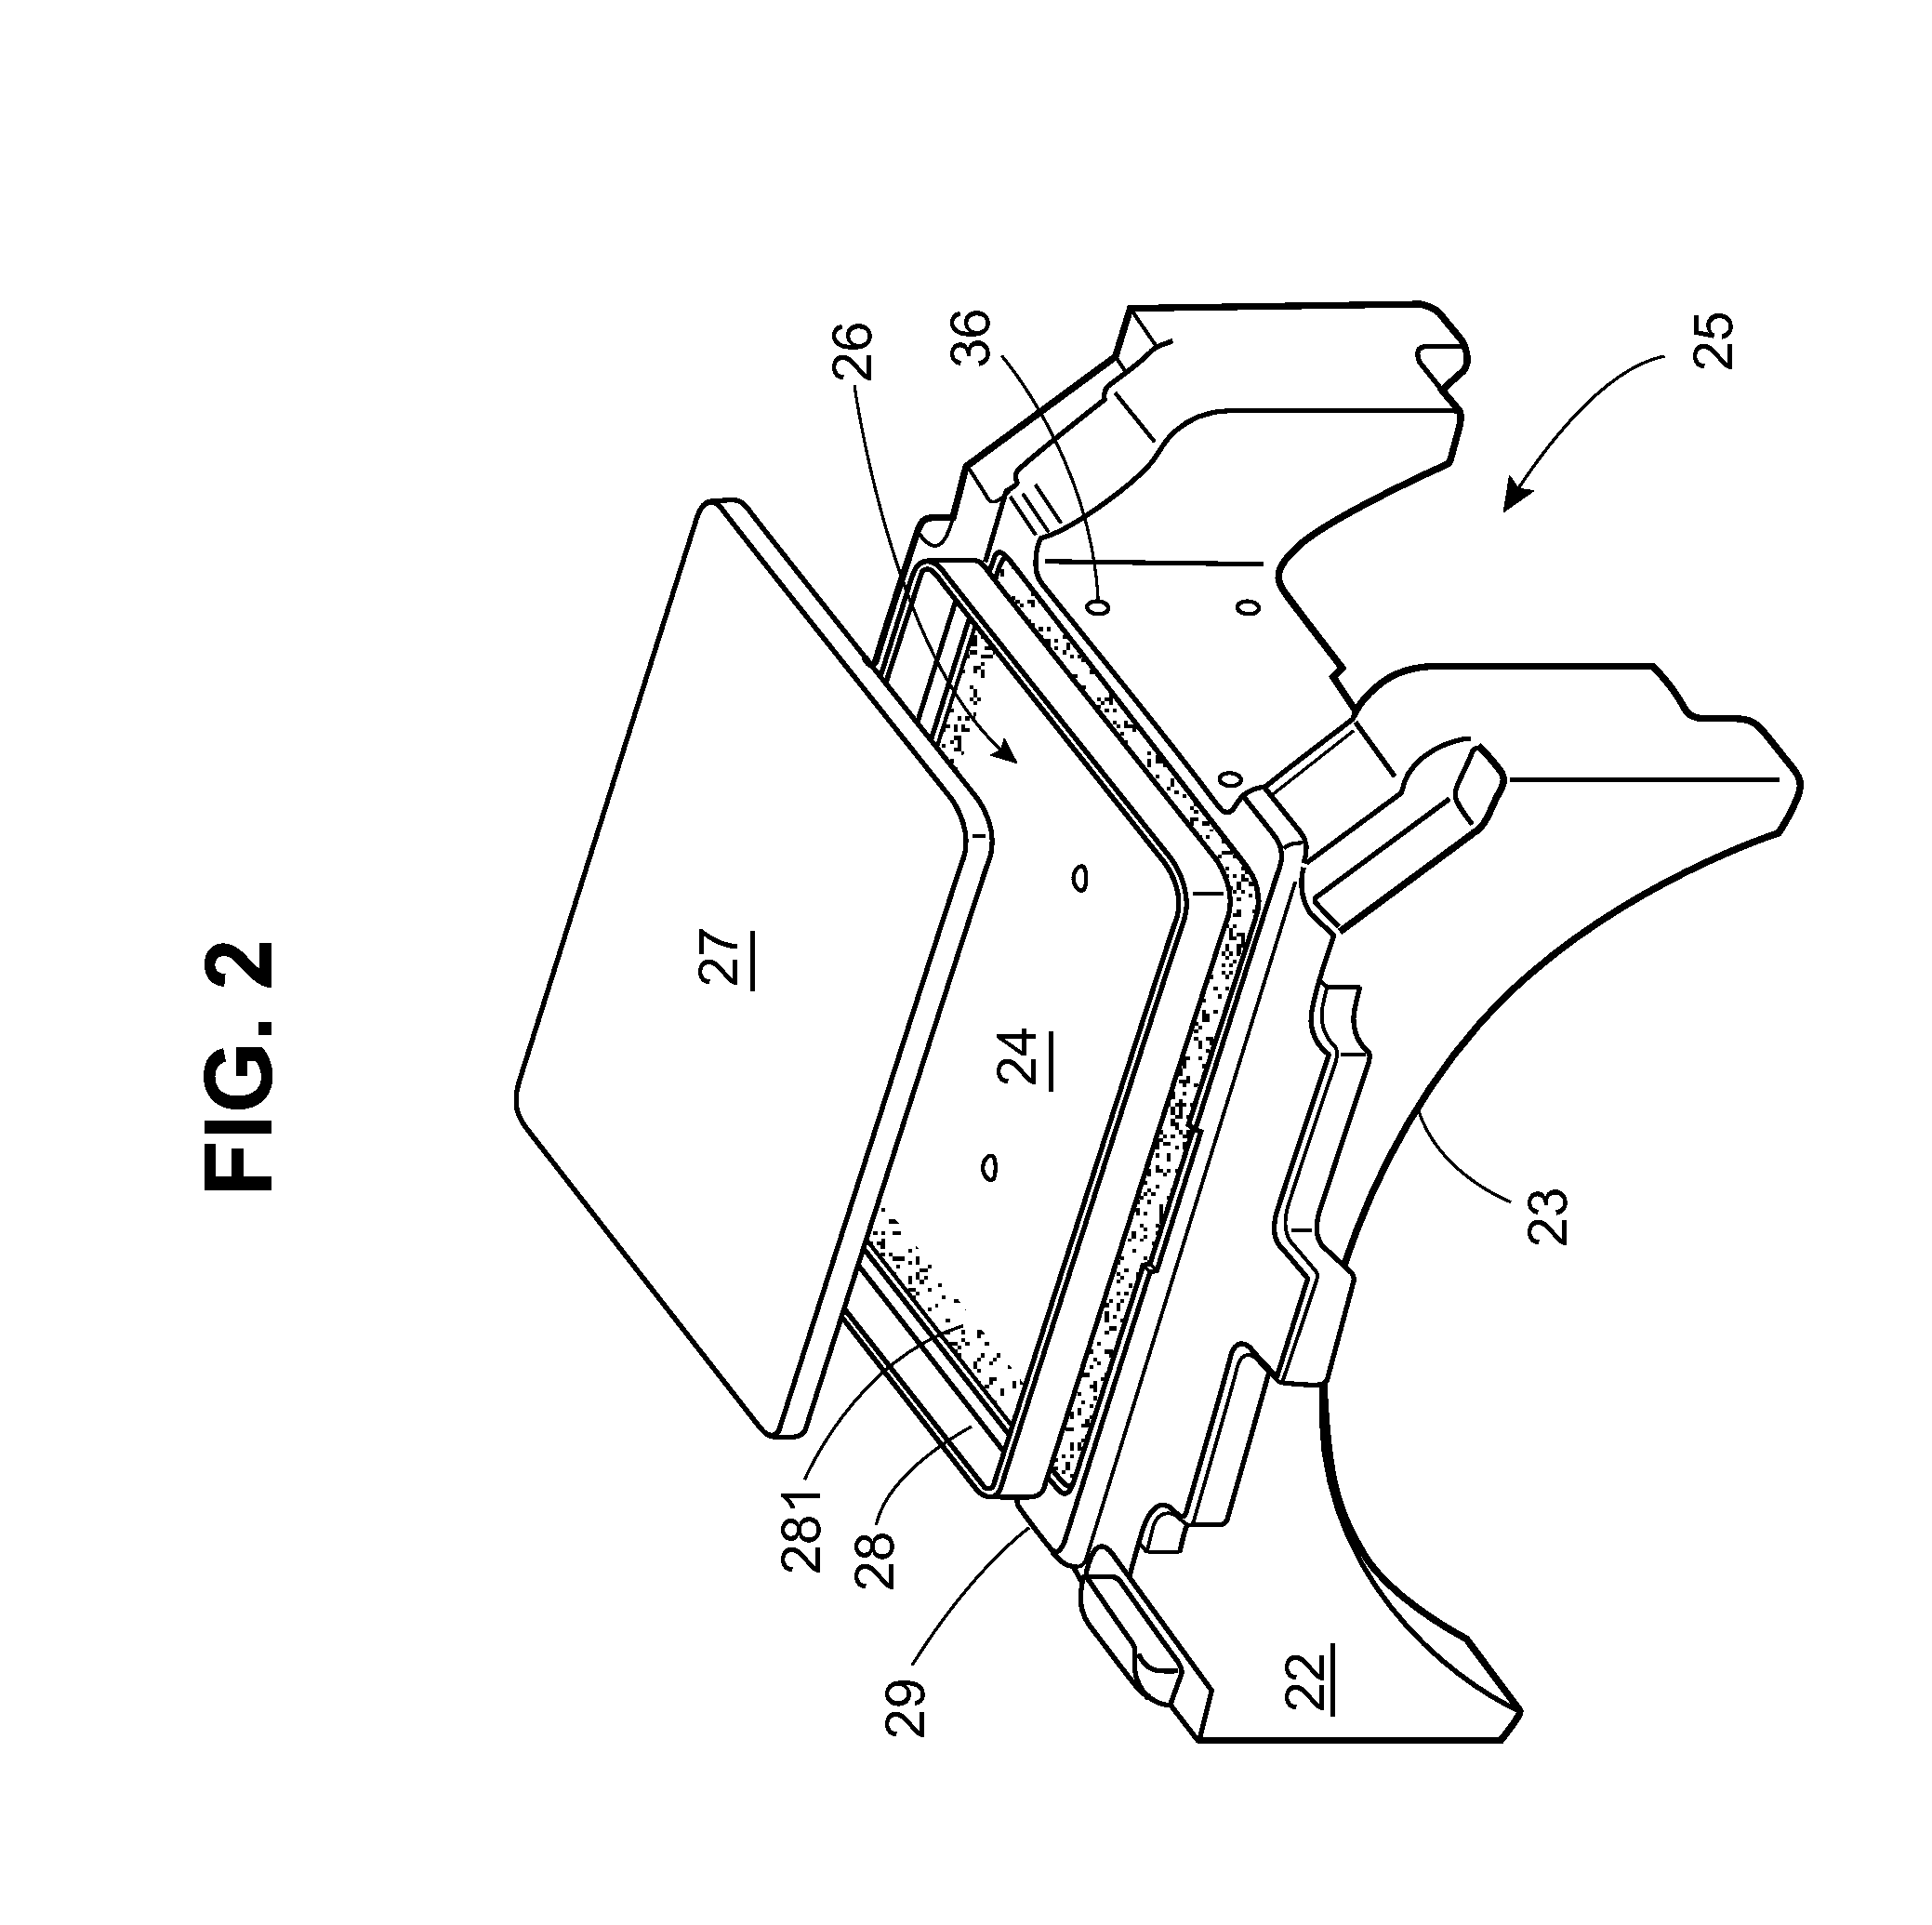 Bearing adapter side frame interface for a railway car truck